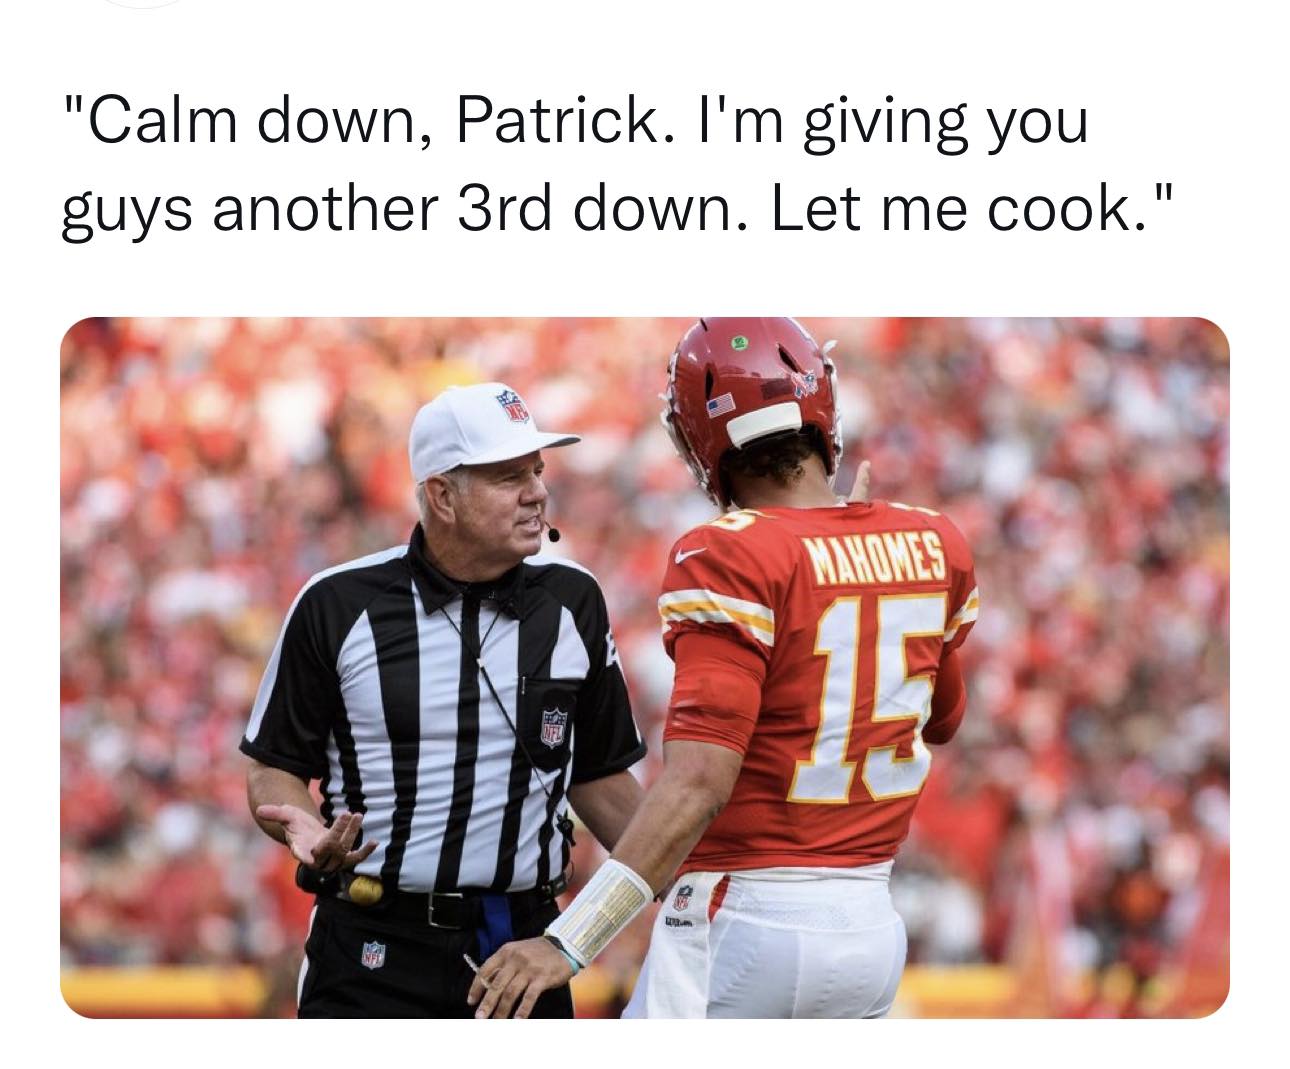 funny memes and pics - Football - "Calm down, Patrick. I'm giving you guys another 3rd down. Let me cook." Mahomes Jube 135